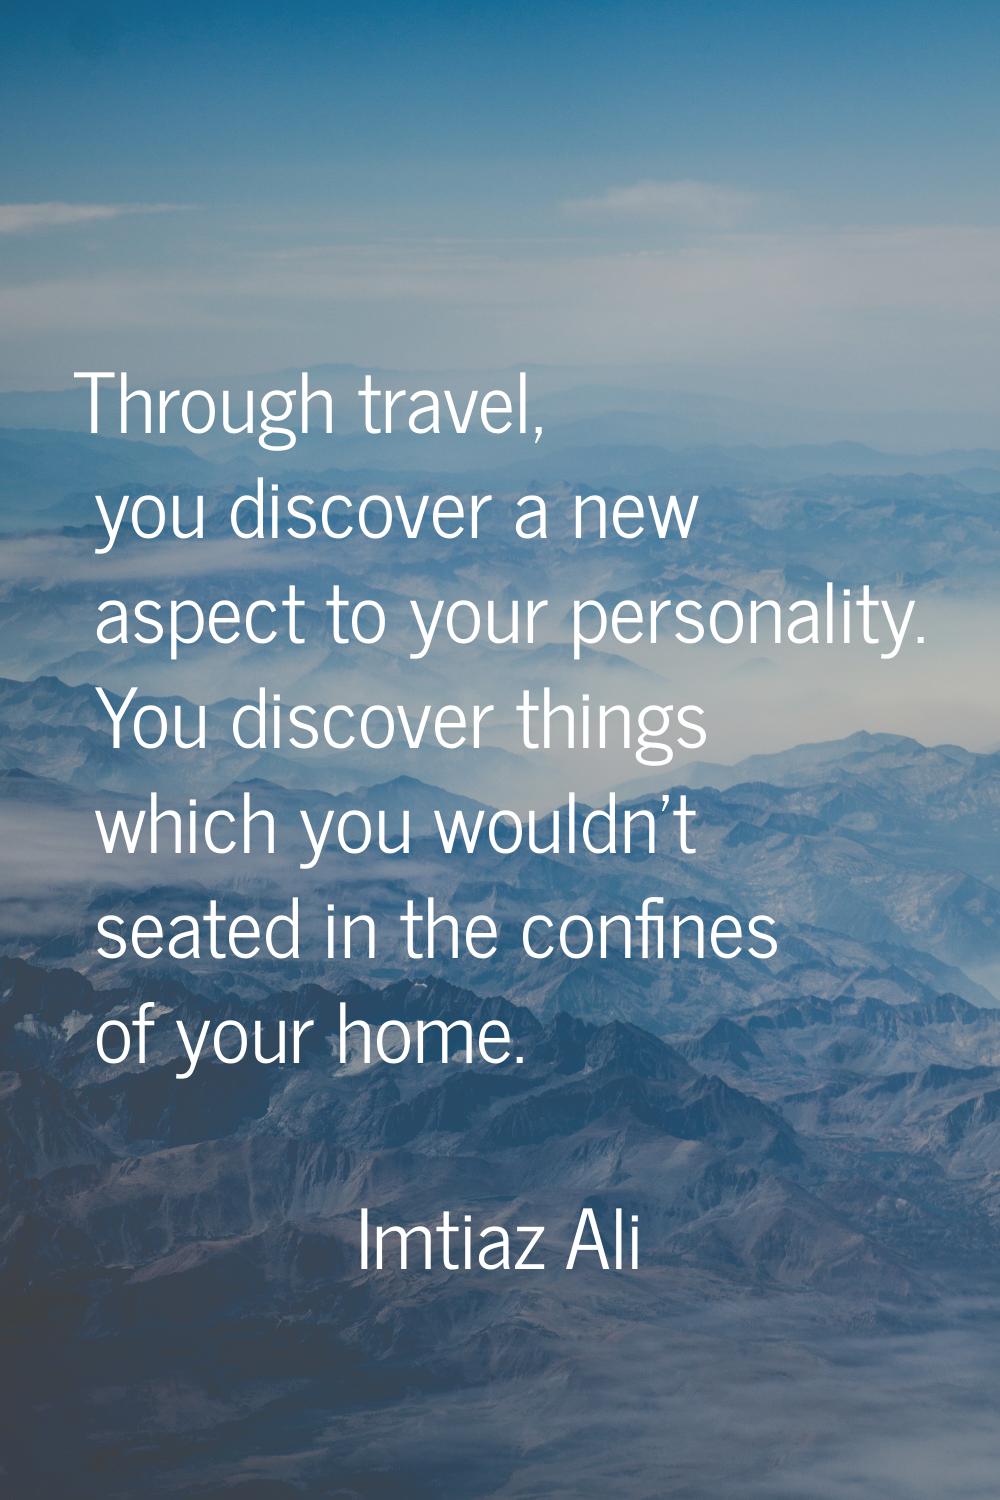 Through travel, you discover a new aspect to your personality. You discover things which you wouldn